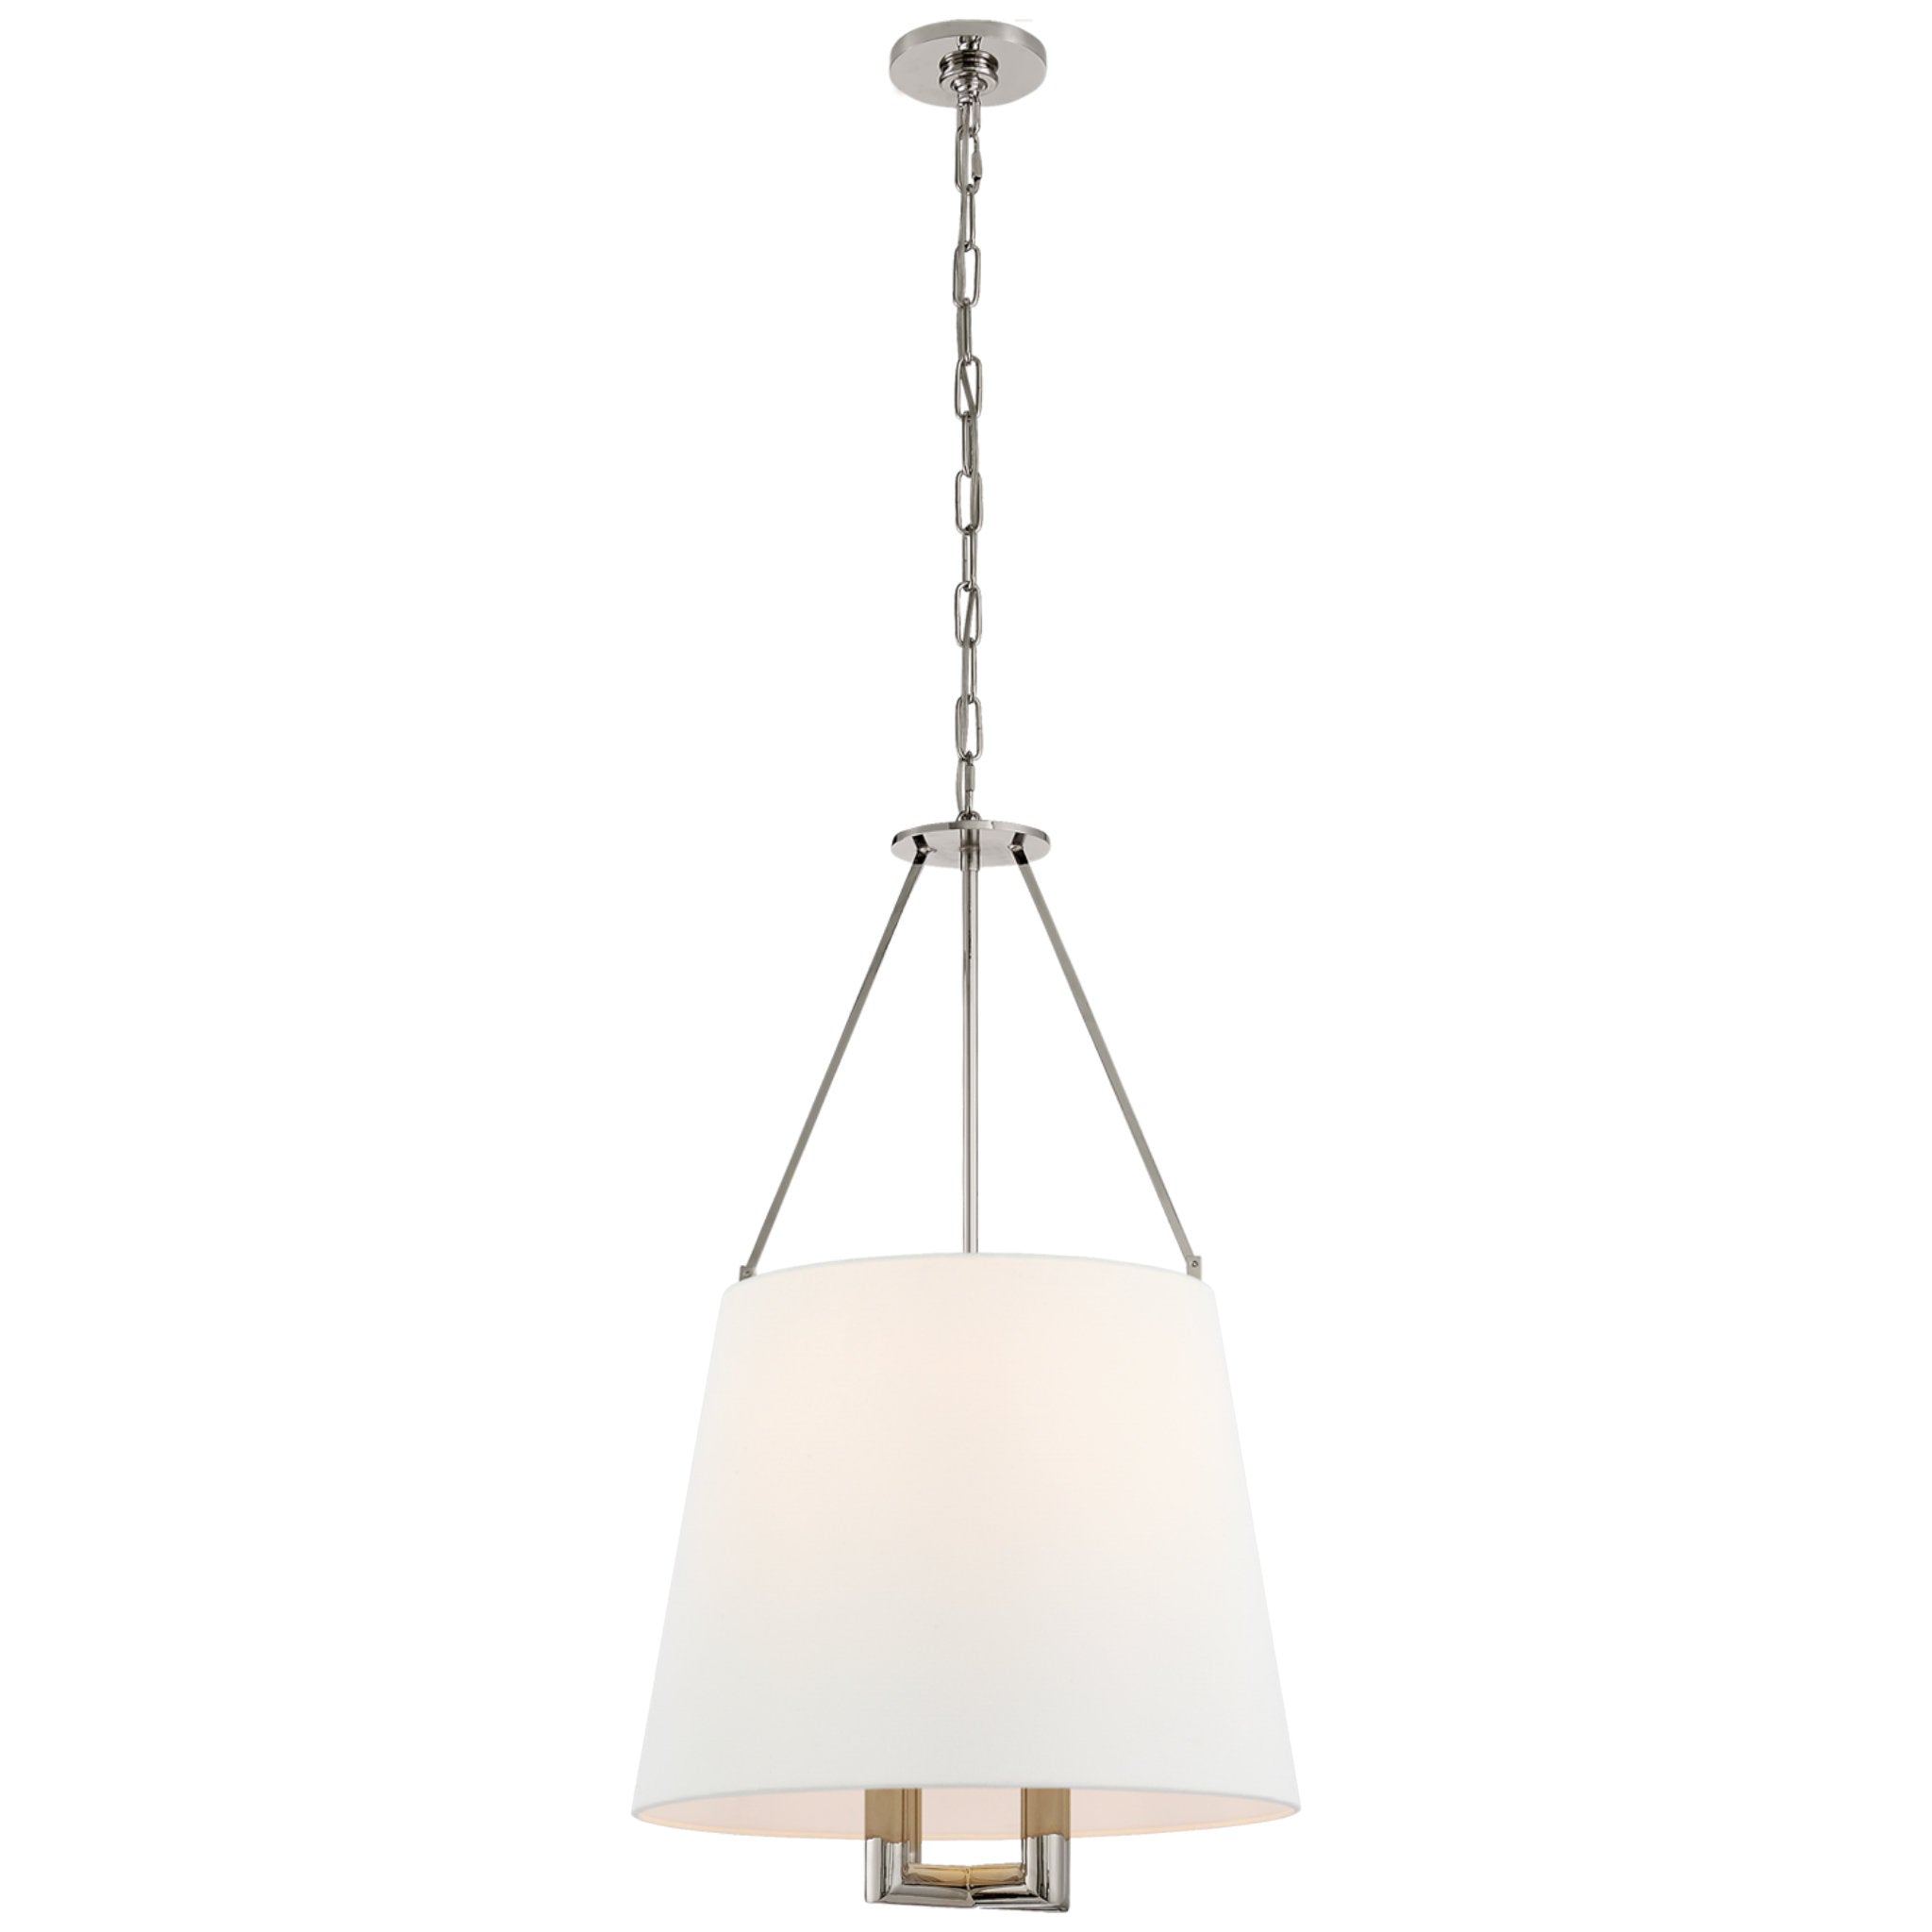 J. Randall Powers Dalston Hanging Shade in Polished Nickel with Linen Shade